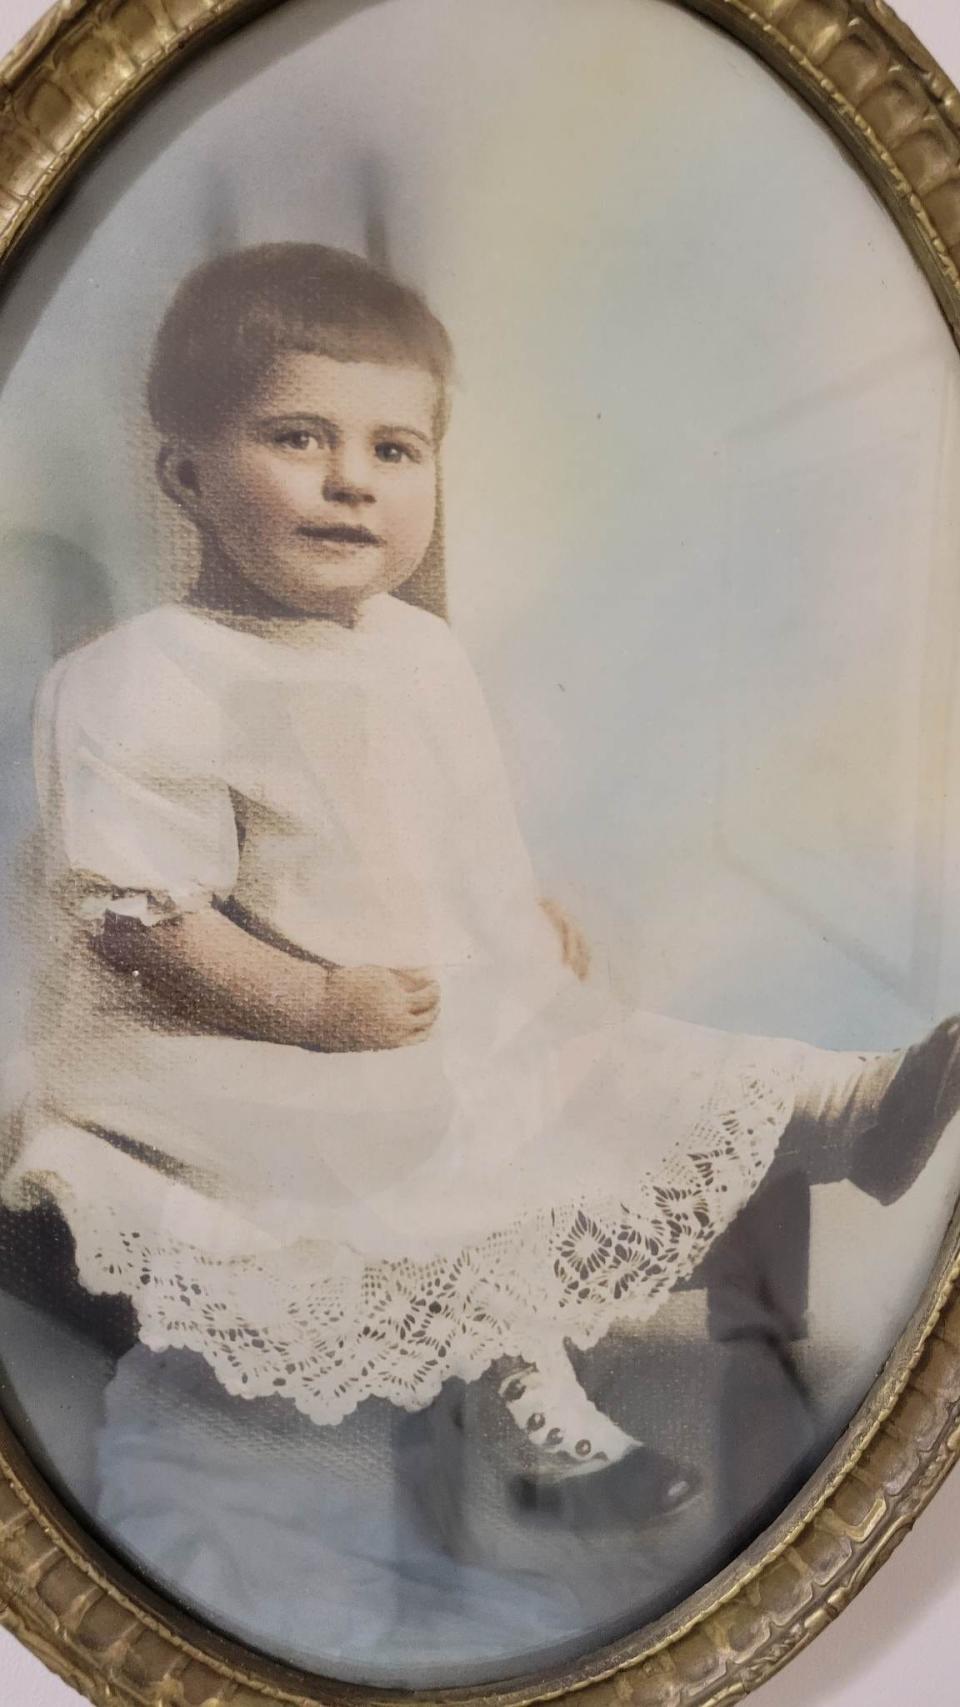 A photo of Gretchen Morgan when she was just 18 months old hangs on her wall at Carolina Reserve of Hendersonville. It was taken back in 1917.